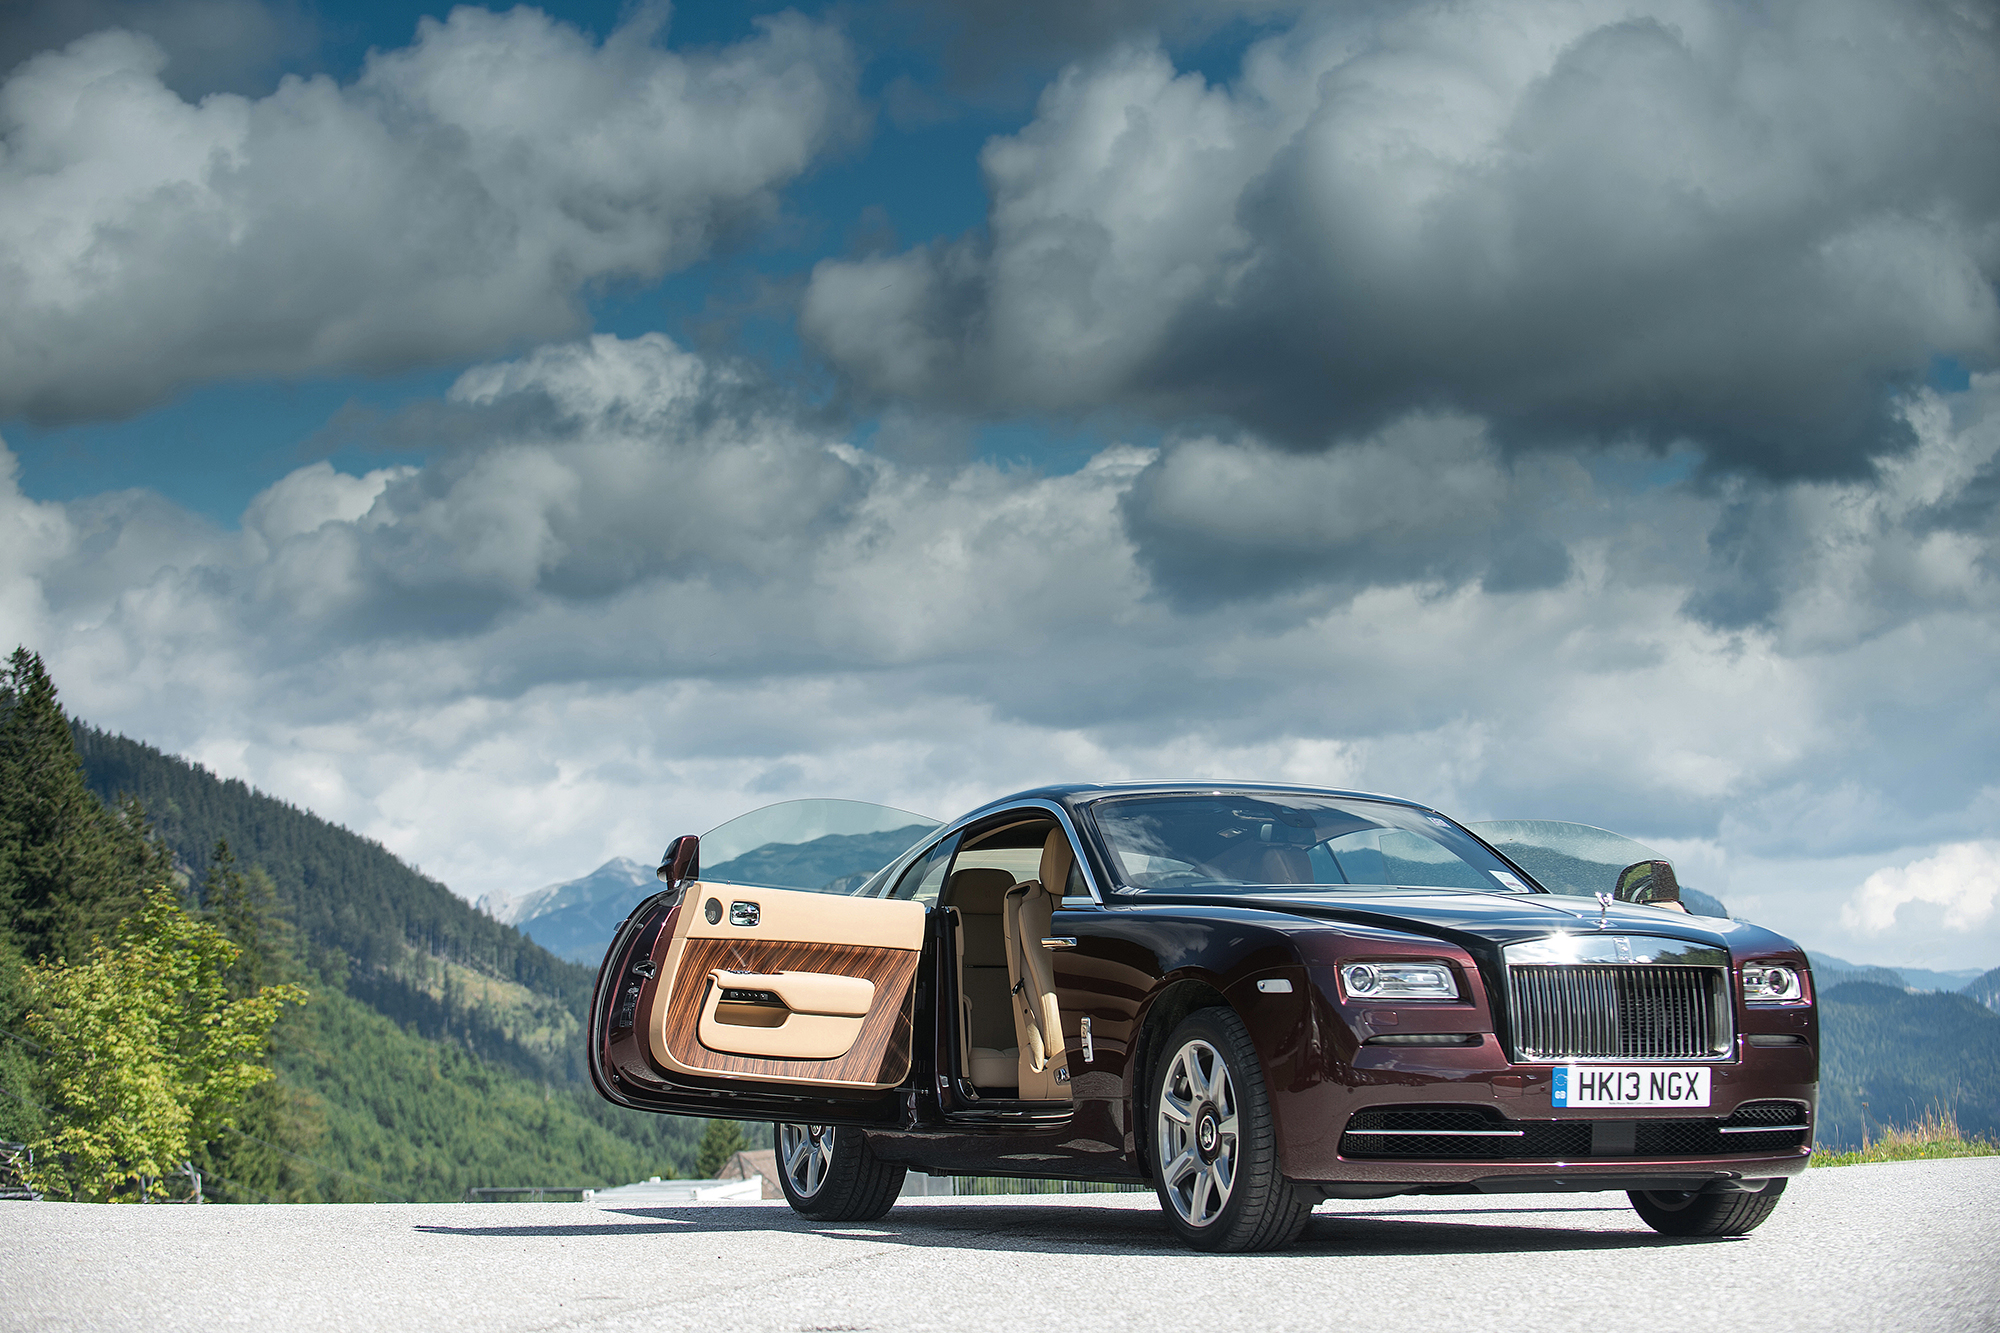 2016 RollsRoyce Wraith  Review and Road Test  YouTube